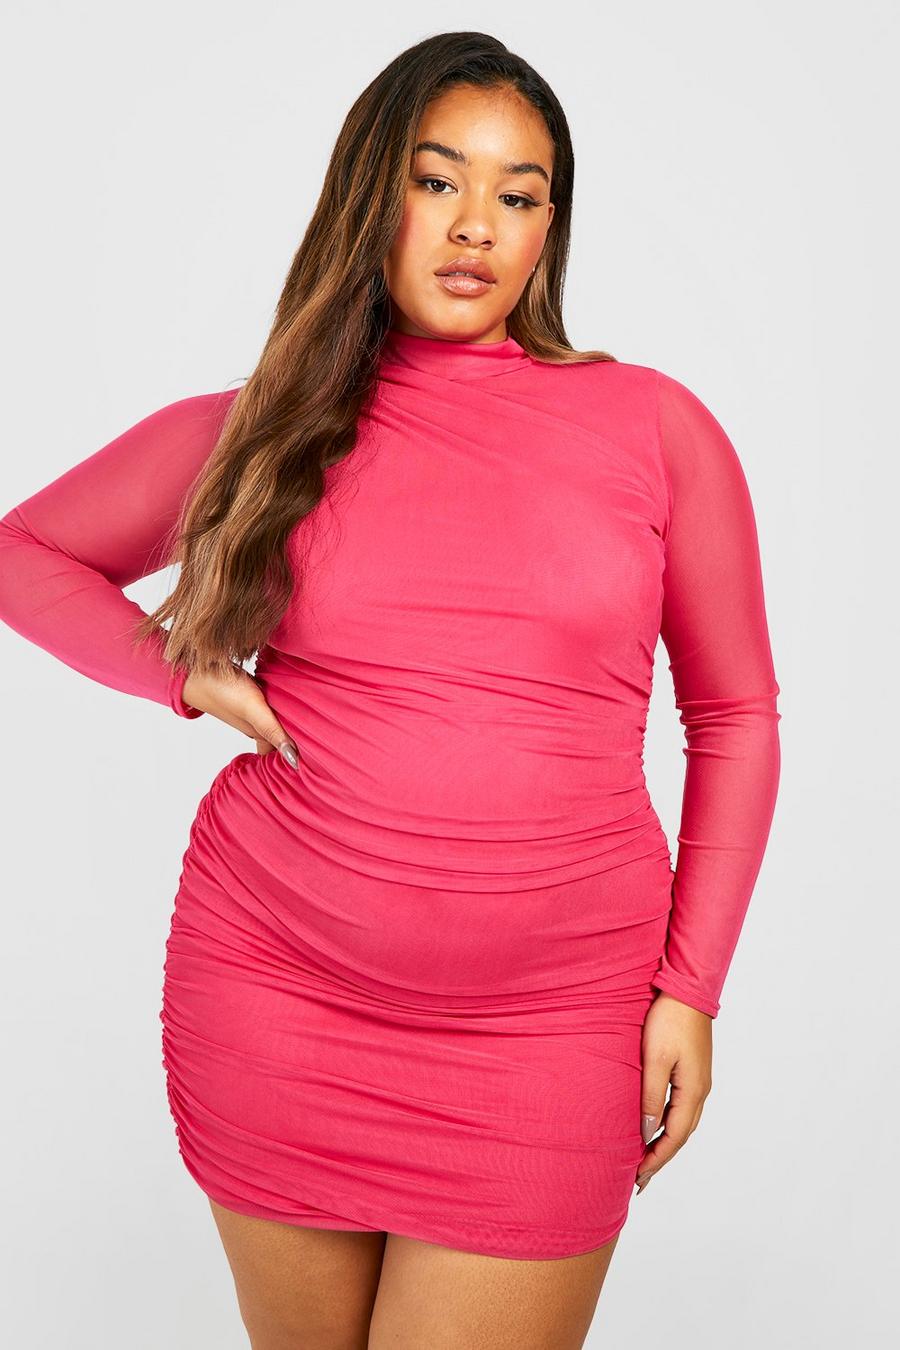 Hot pink rose Plus Mesh Long Sleeve Ruched Dress